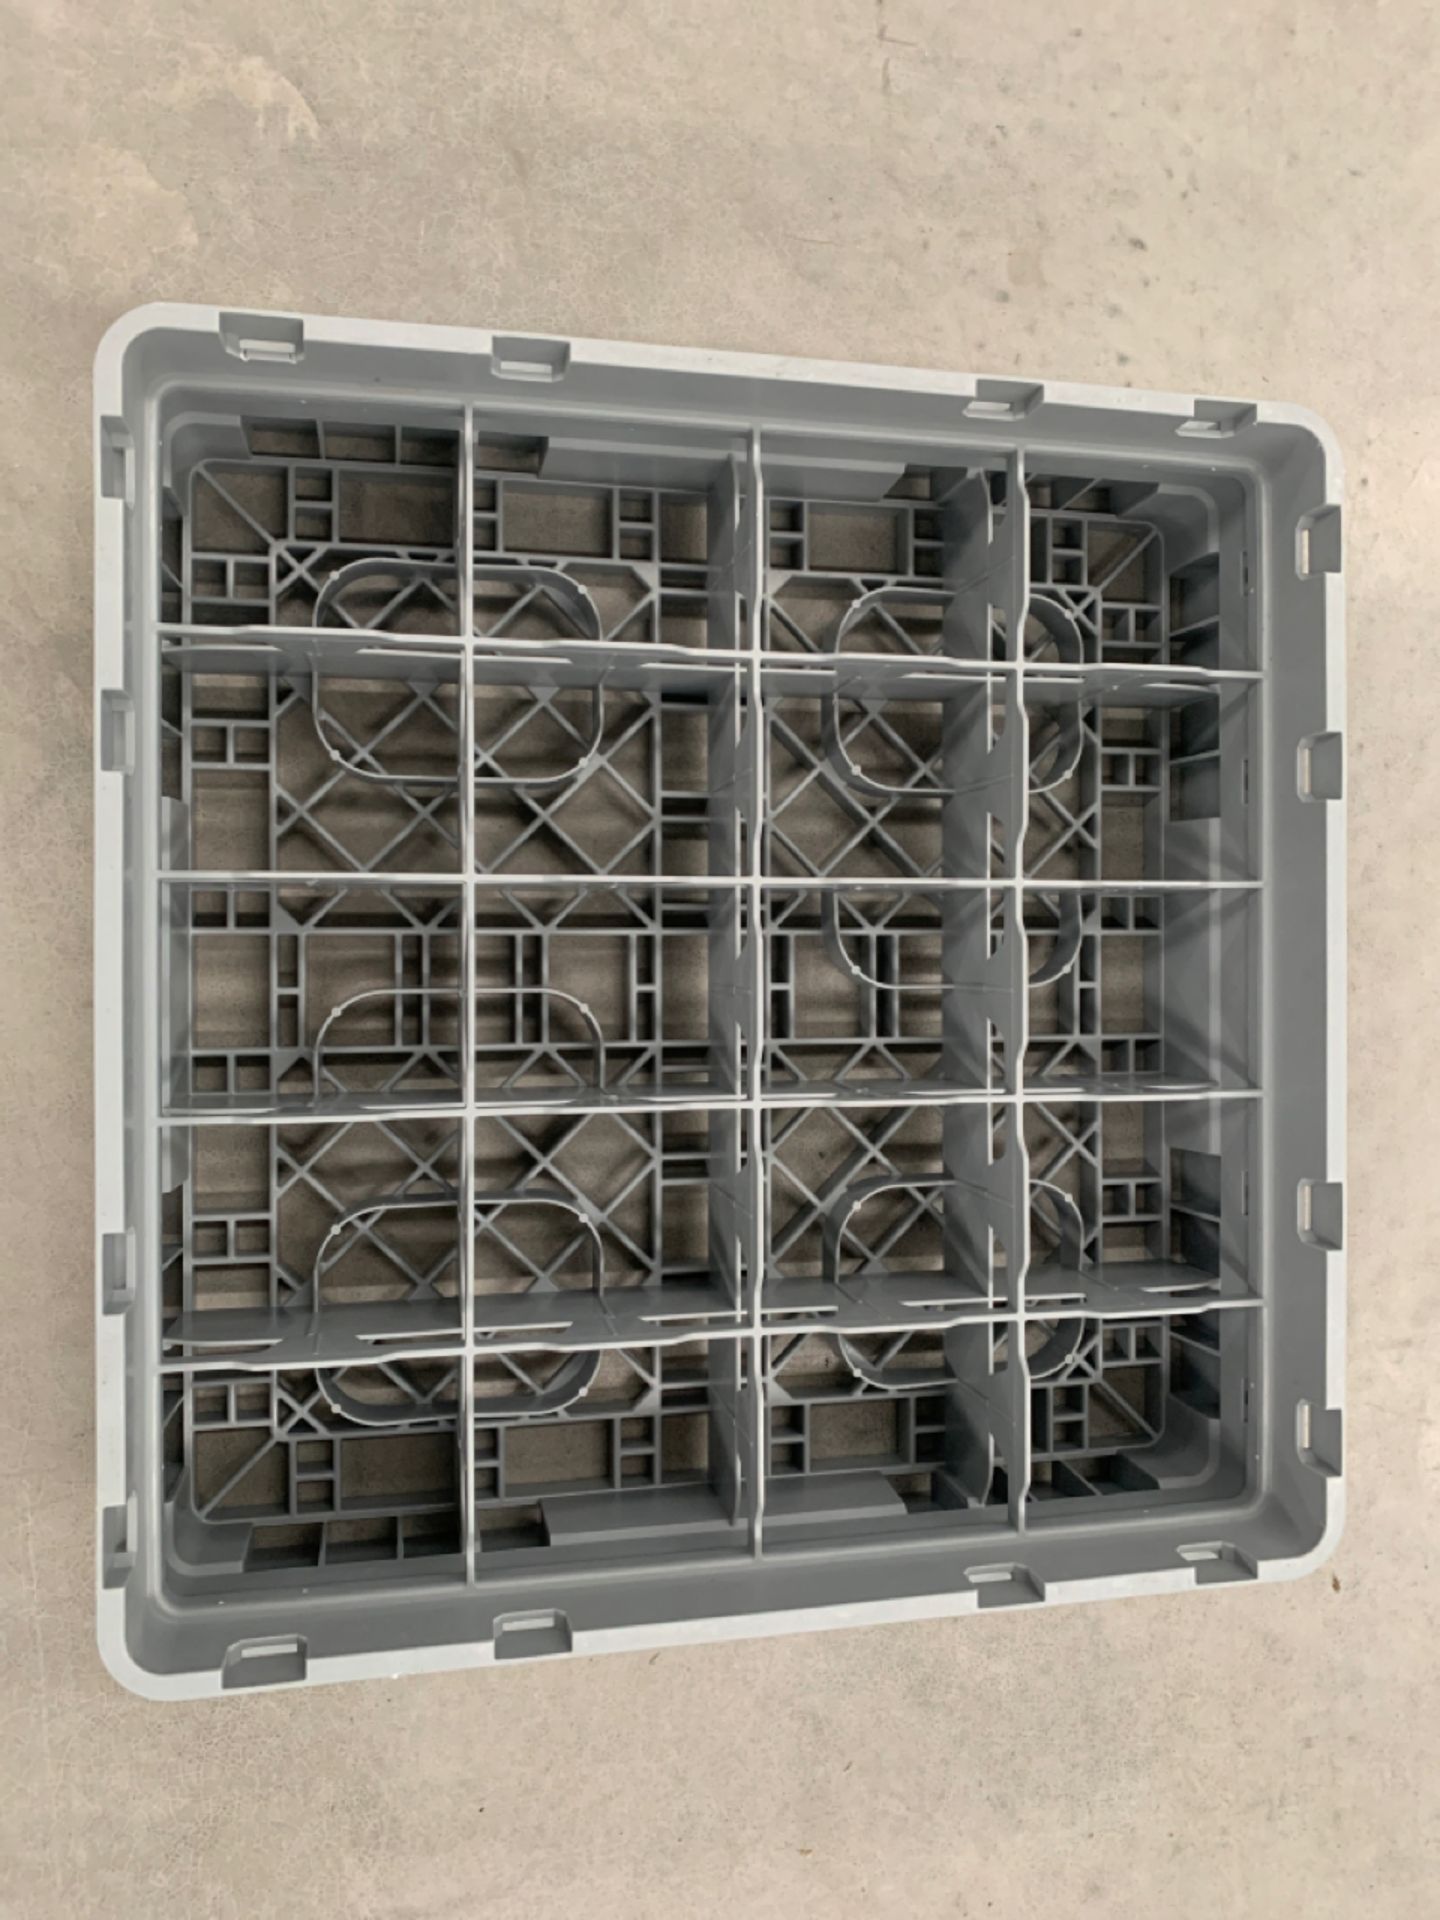 Set of 4 Cambro One Height Washing Baskets - Image 2 of 3